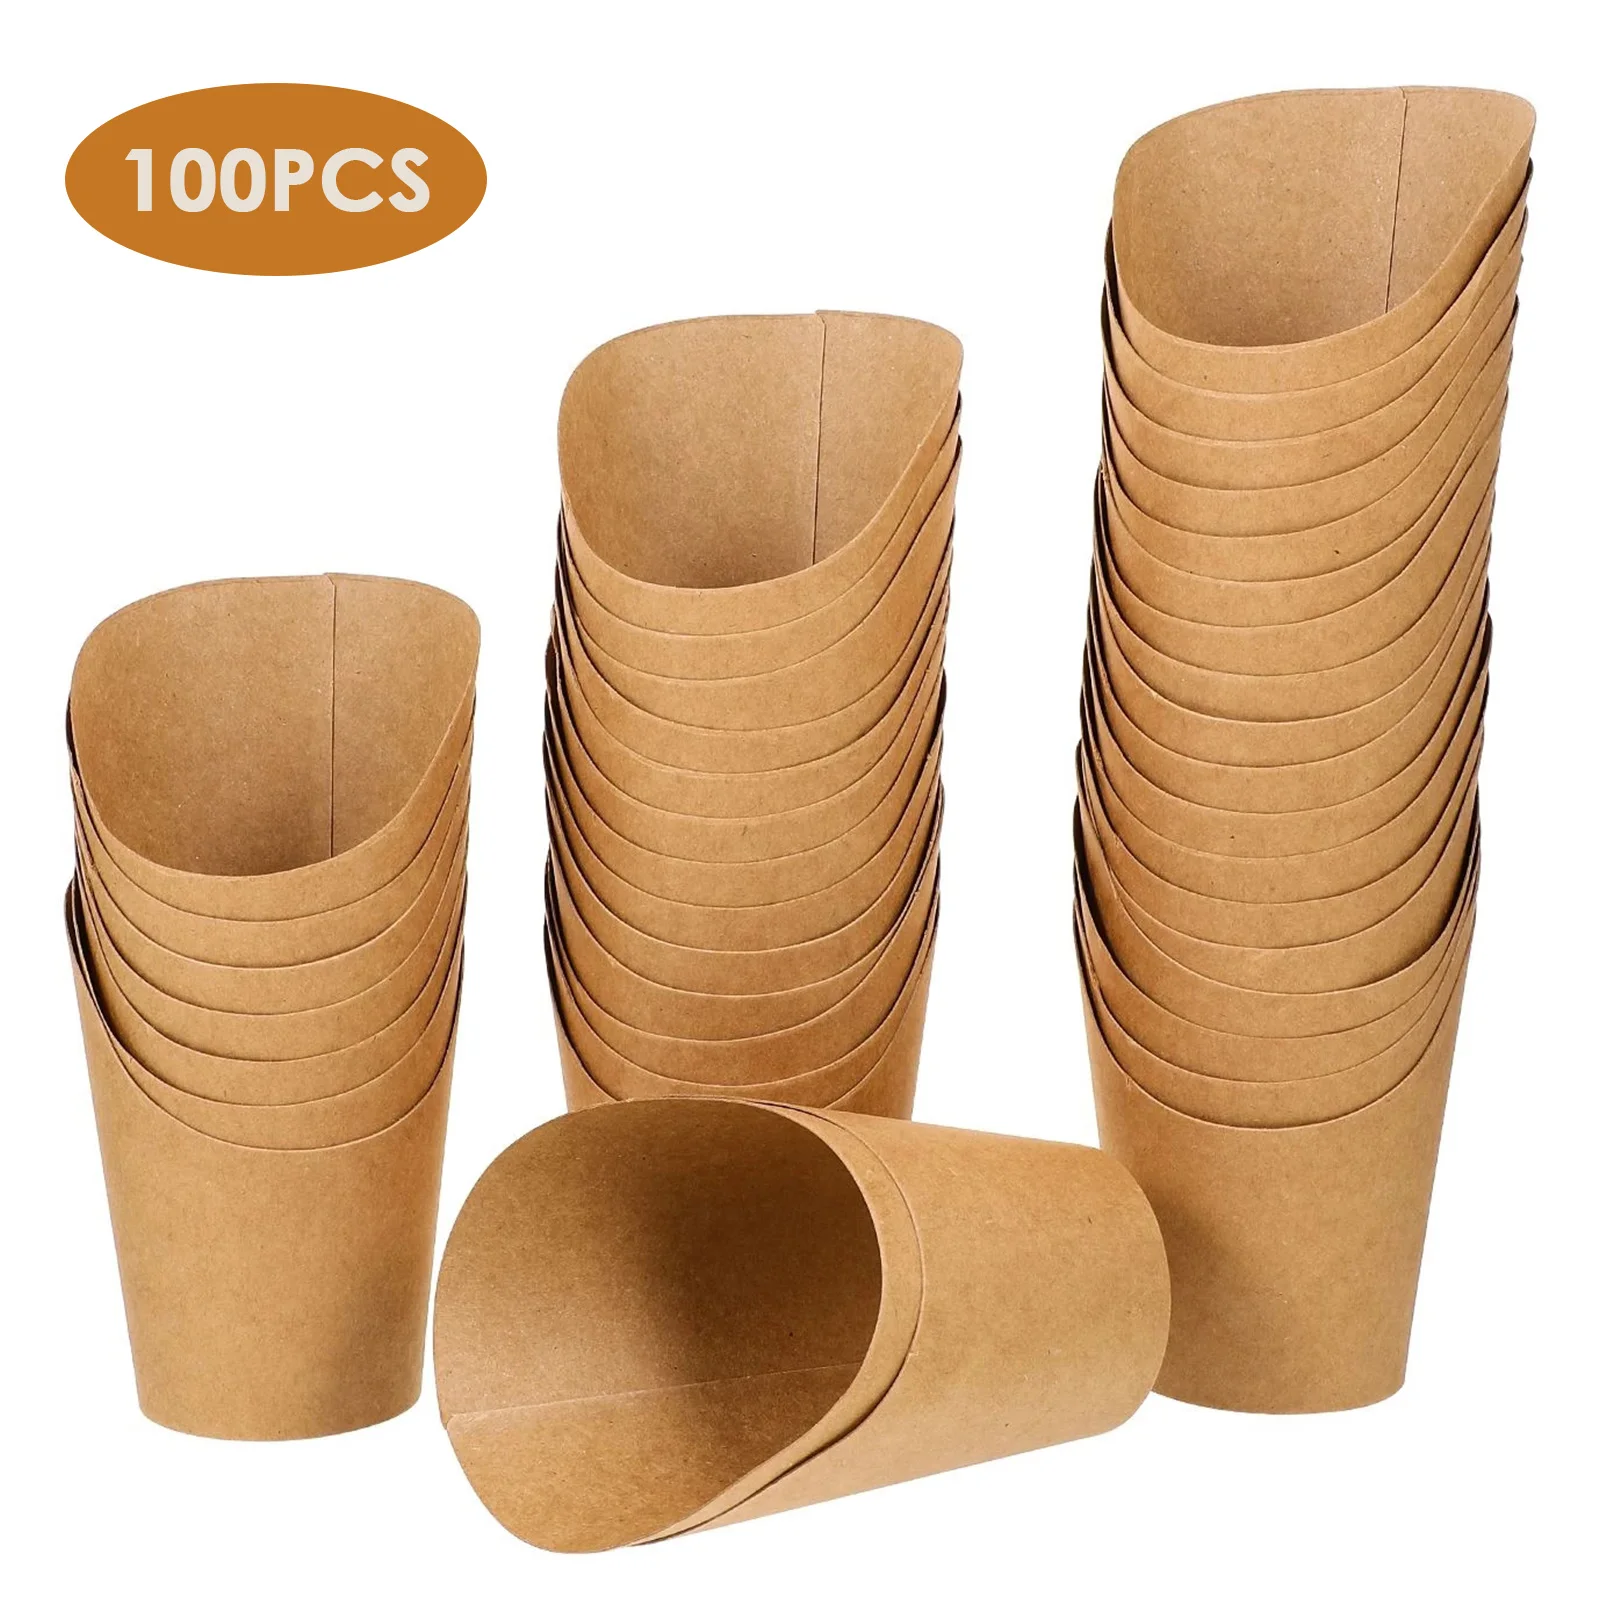 100pcs Kraft Paper Potato Chips Box Disposable Paper Bags,french Fries Cup,food Bags,snack Packing Boxes,Hand Holding Snack Cup